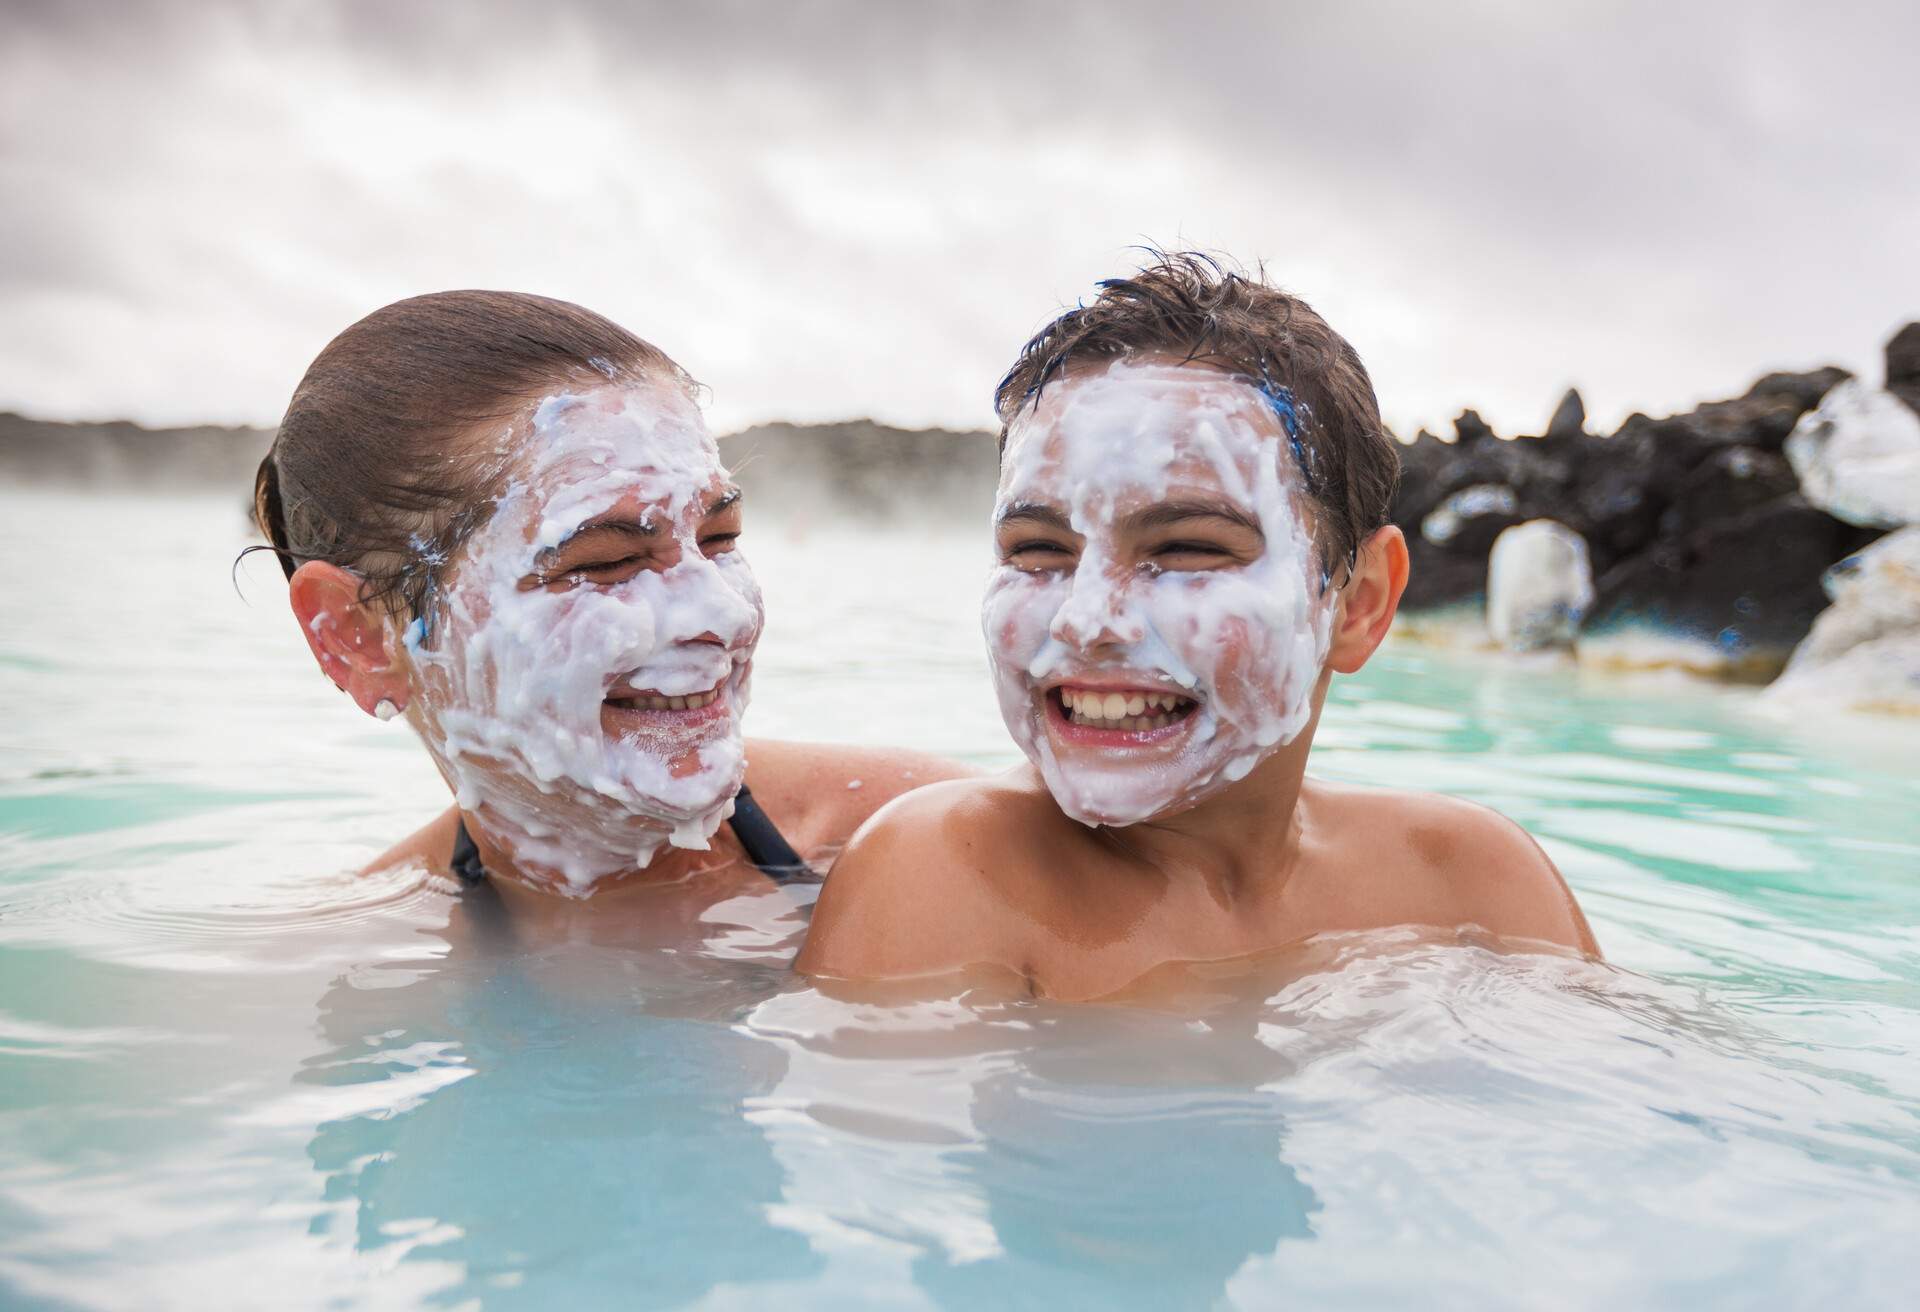 Mother and son having fun together, joking, smiling with natural sulphur face masks in Icelandic Natural Wellness Lagoon. Kevlavic, Iceland.